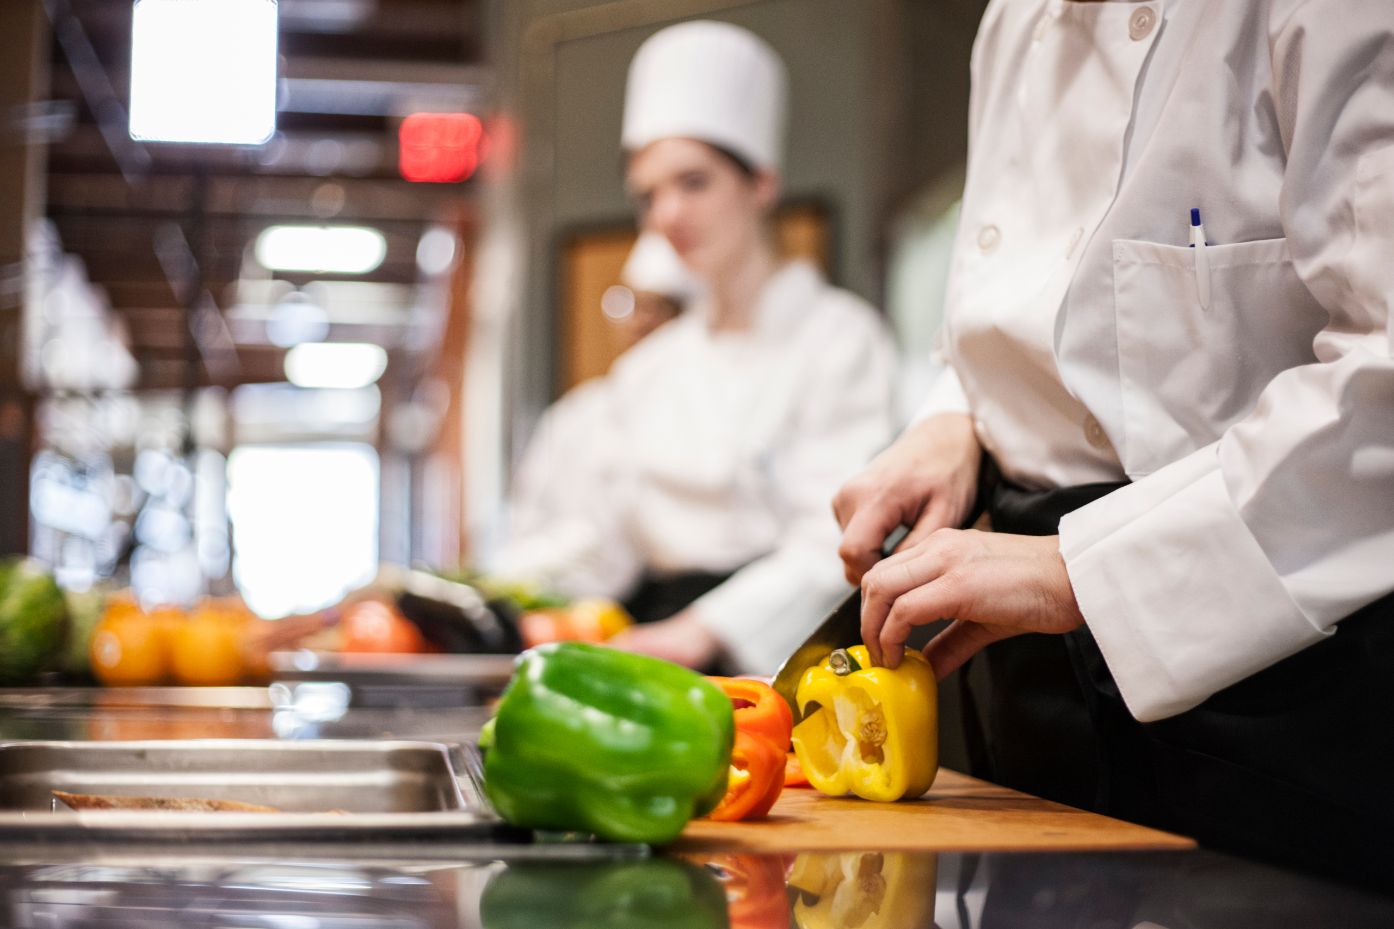 Modern Day Influence on Food Services Transforms The Culinary World